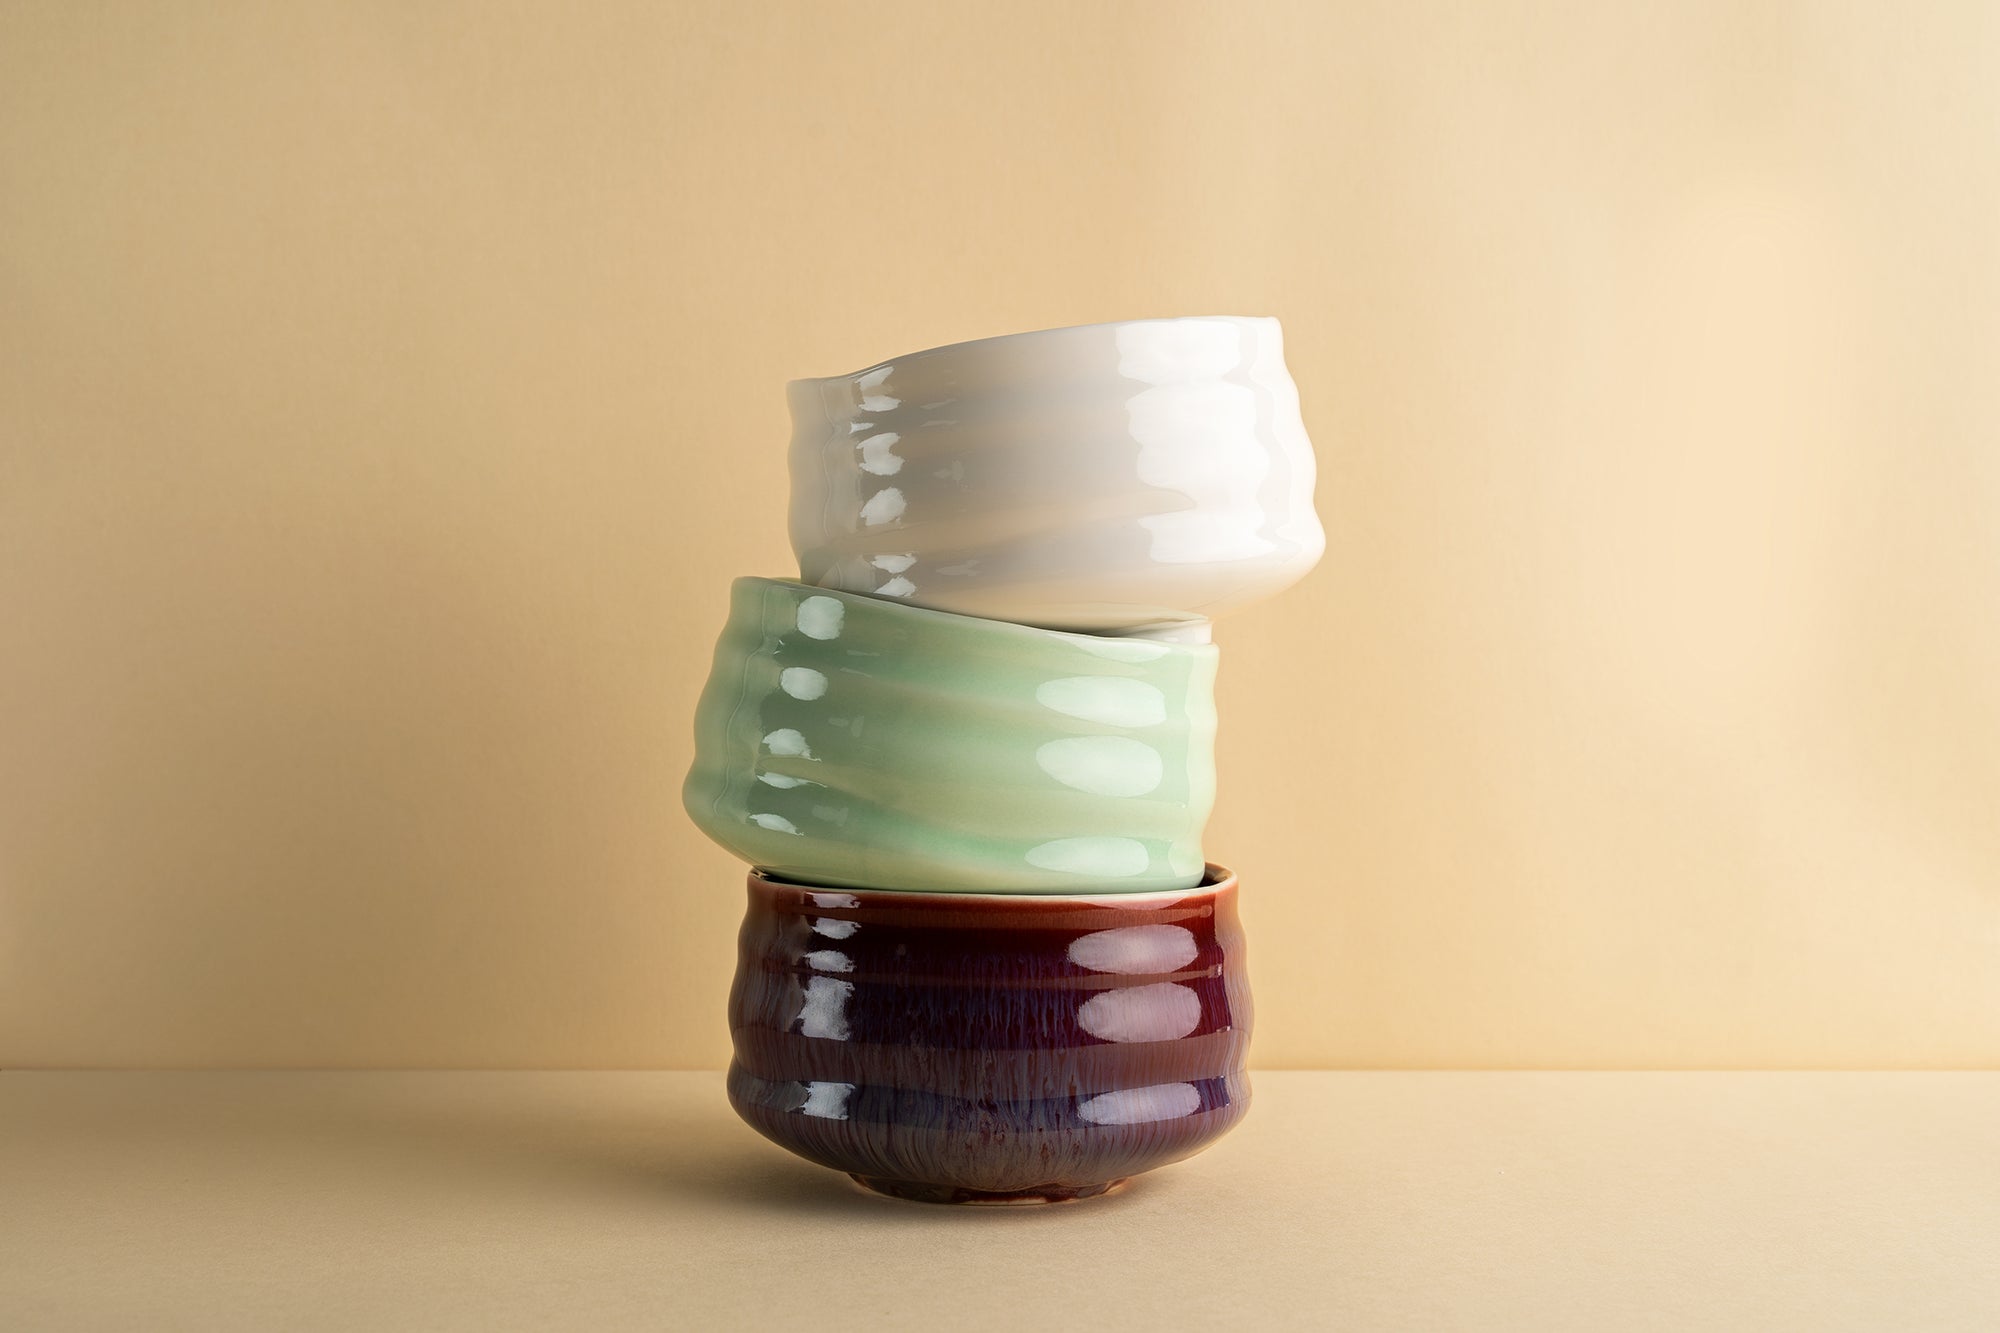 A stack of three bowls that are red, green, and white.